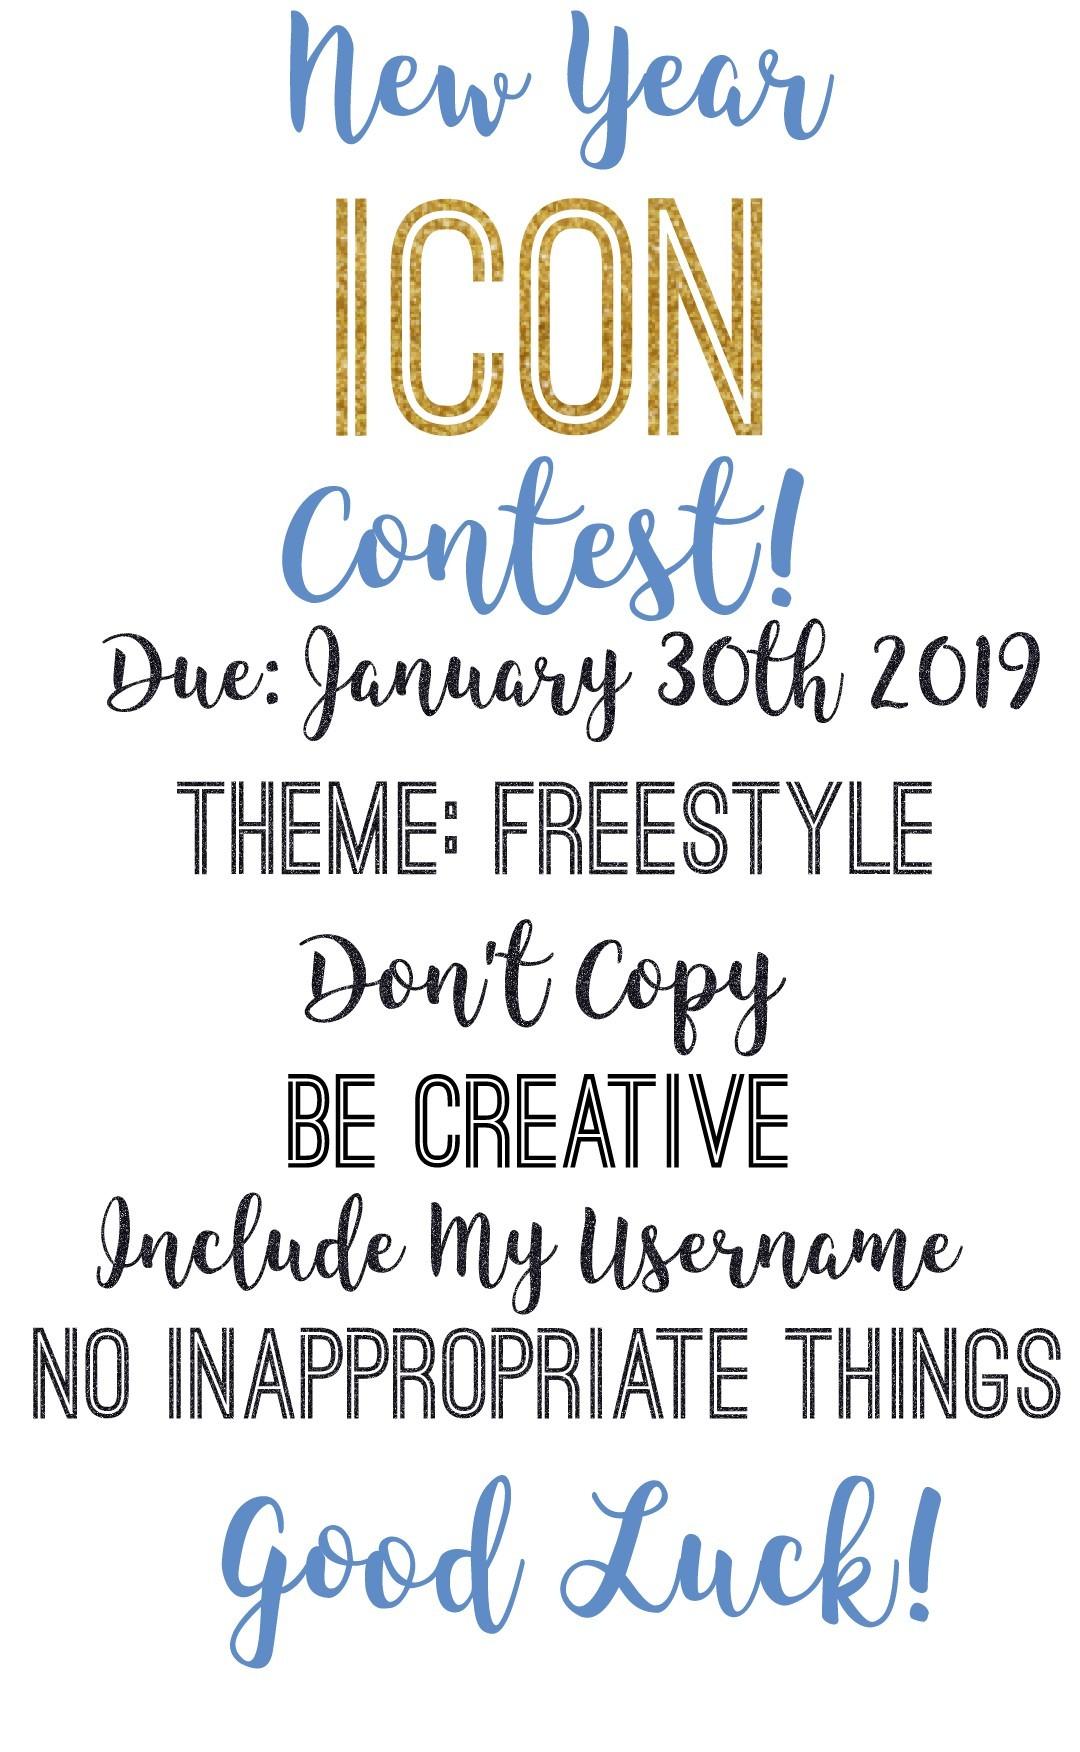 New Year Icon Contest!